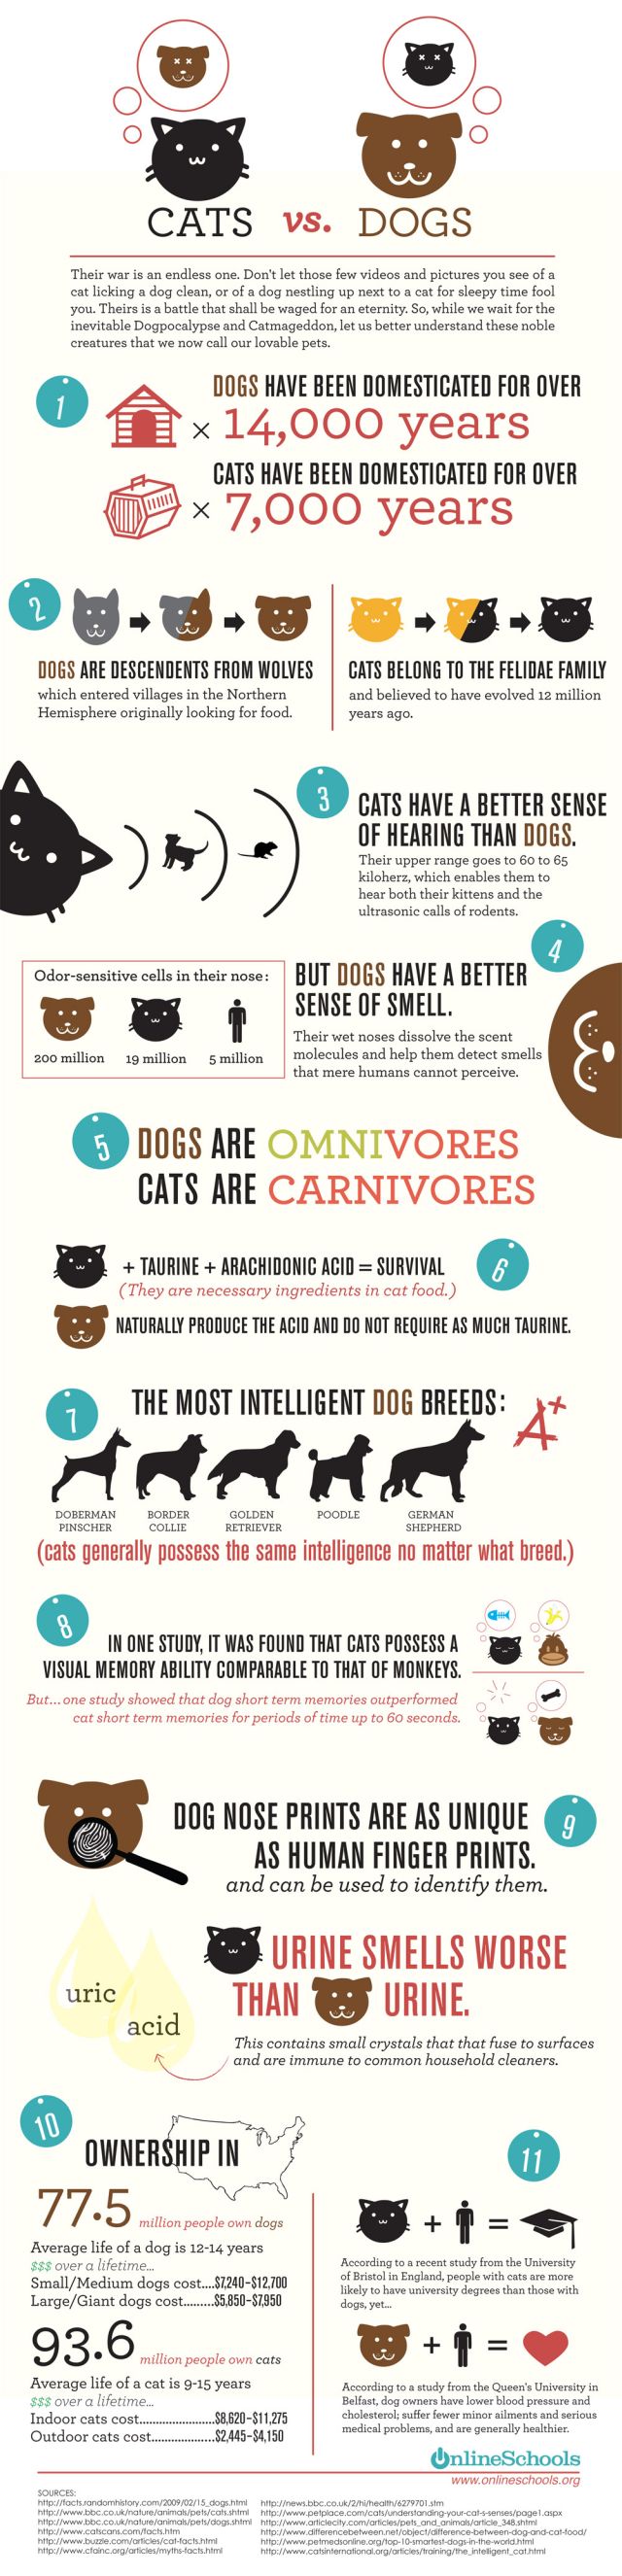 About Cats and Dogs